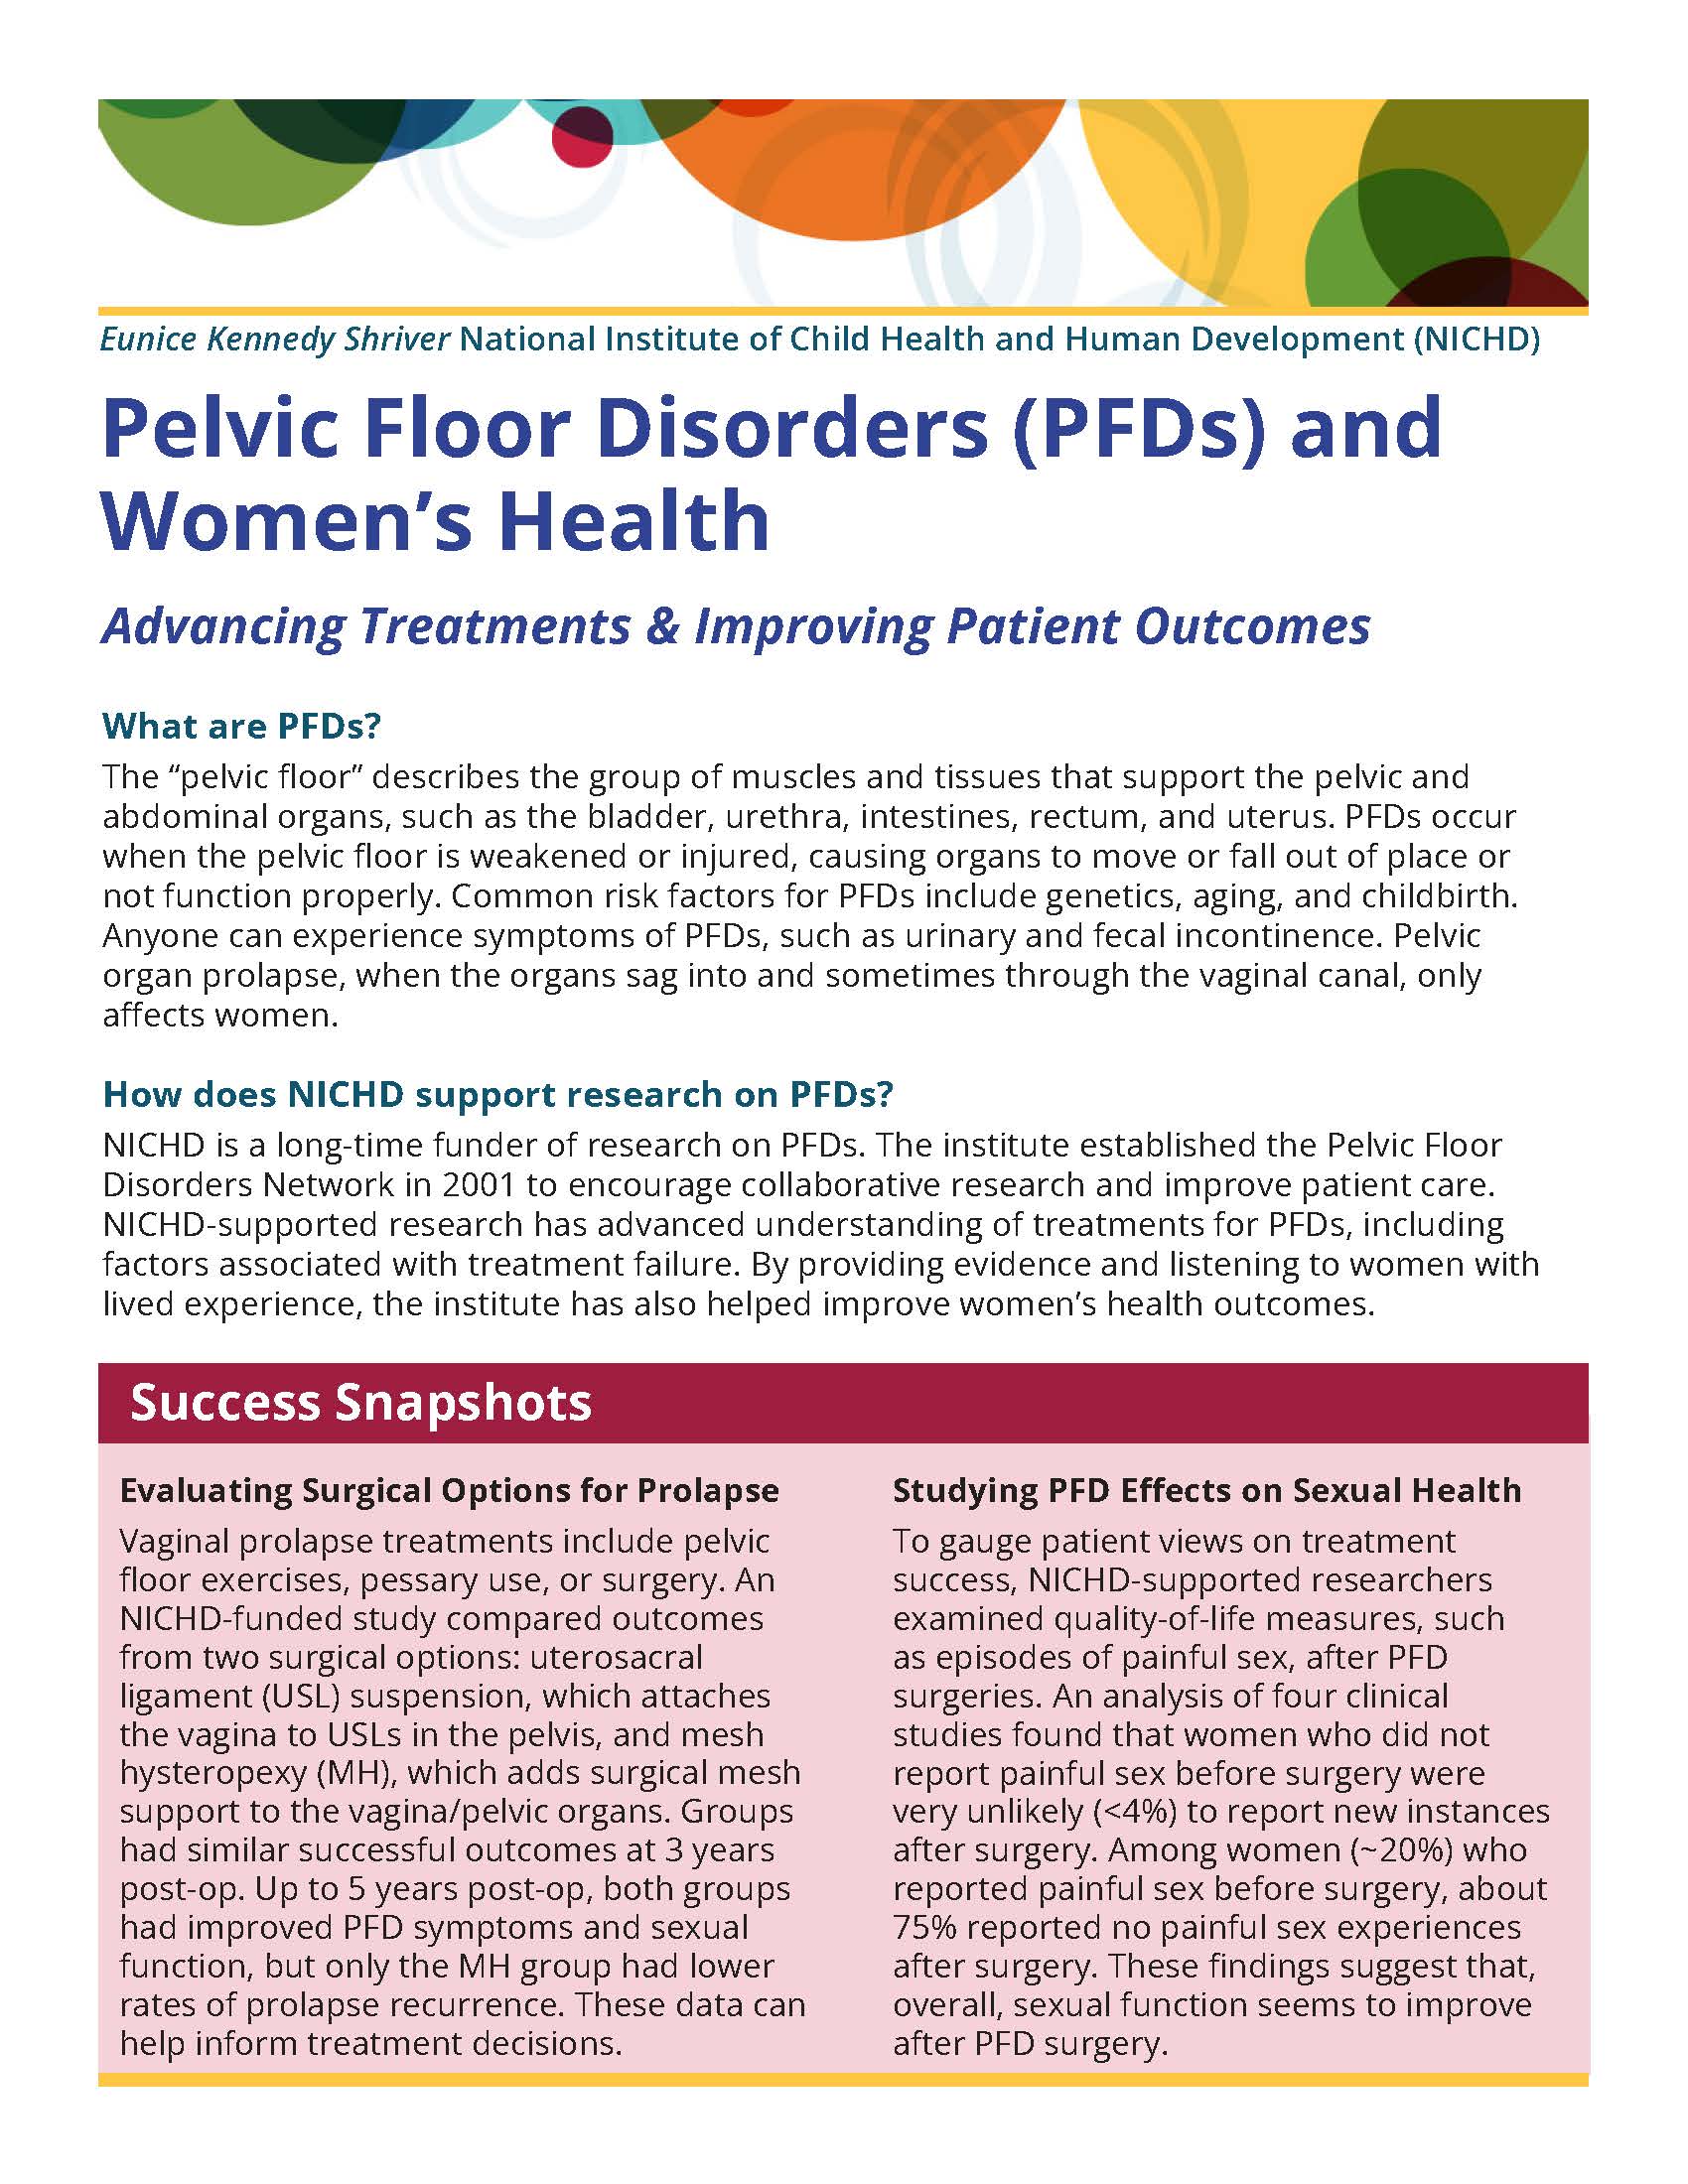 Front side of the "Pelvic Floor Disorders (PFDs) and Women's Health" fact sheet